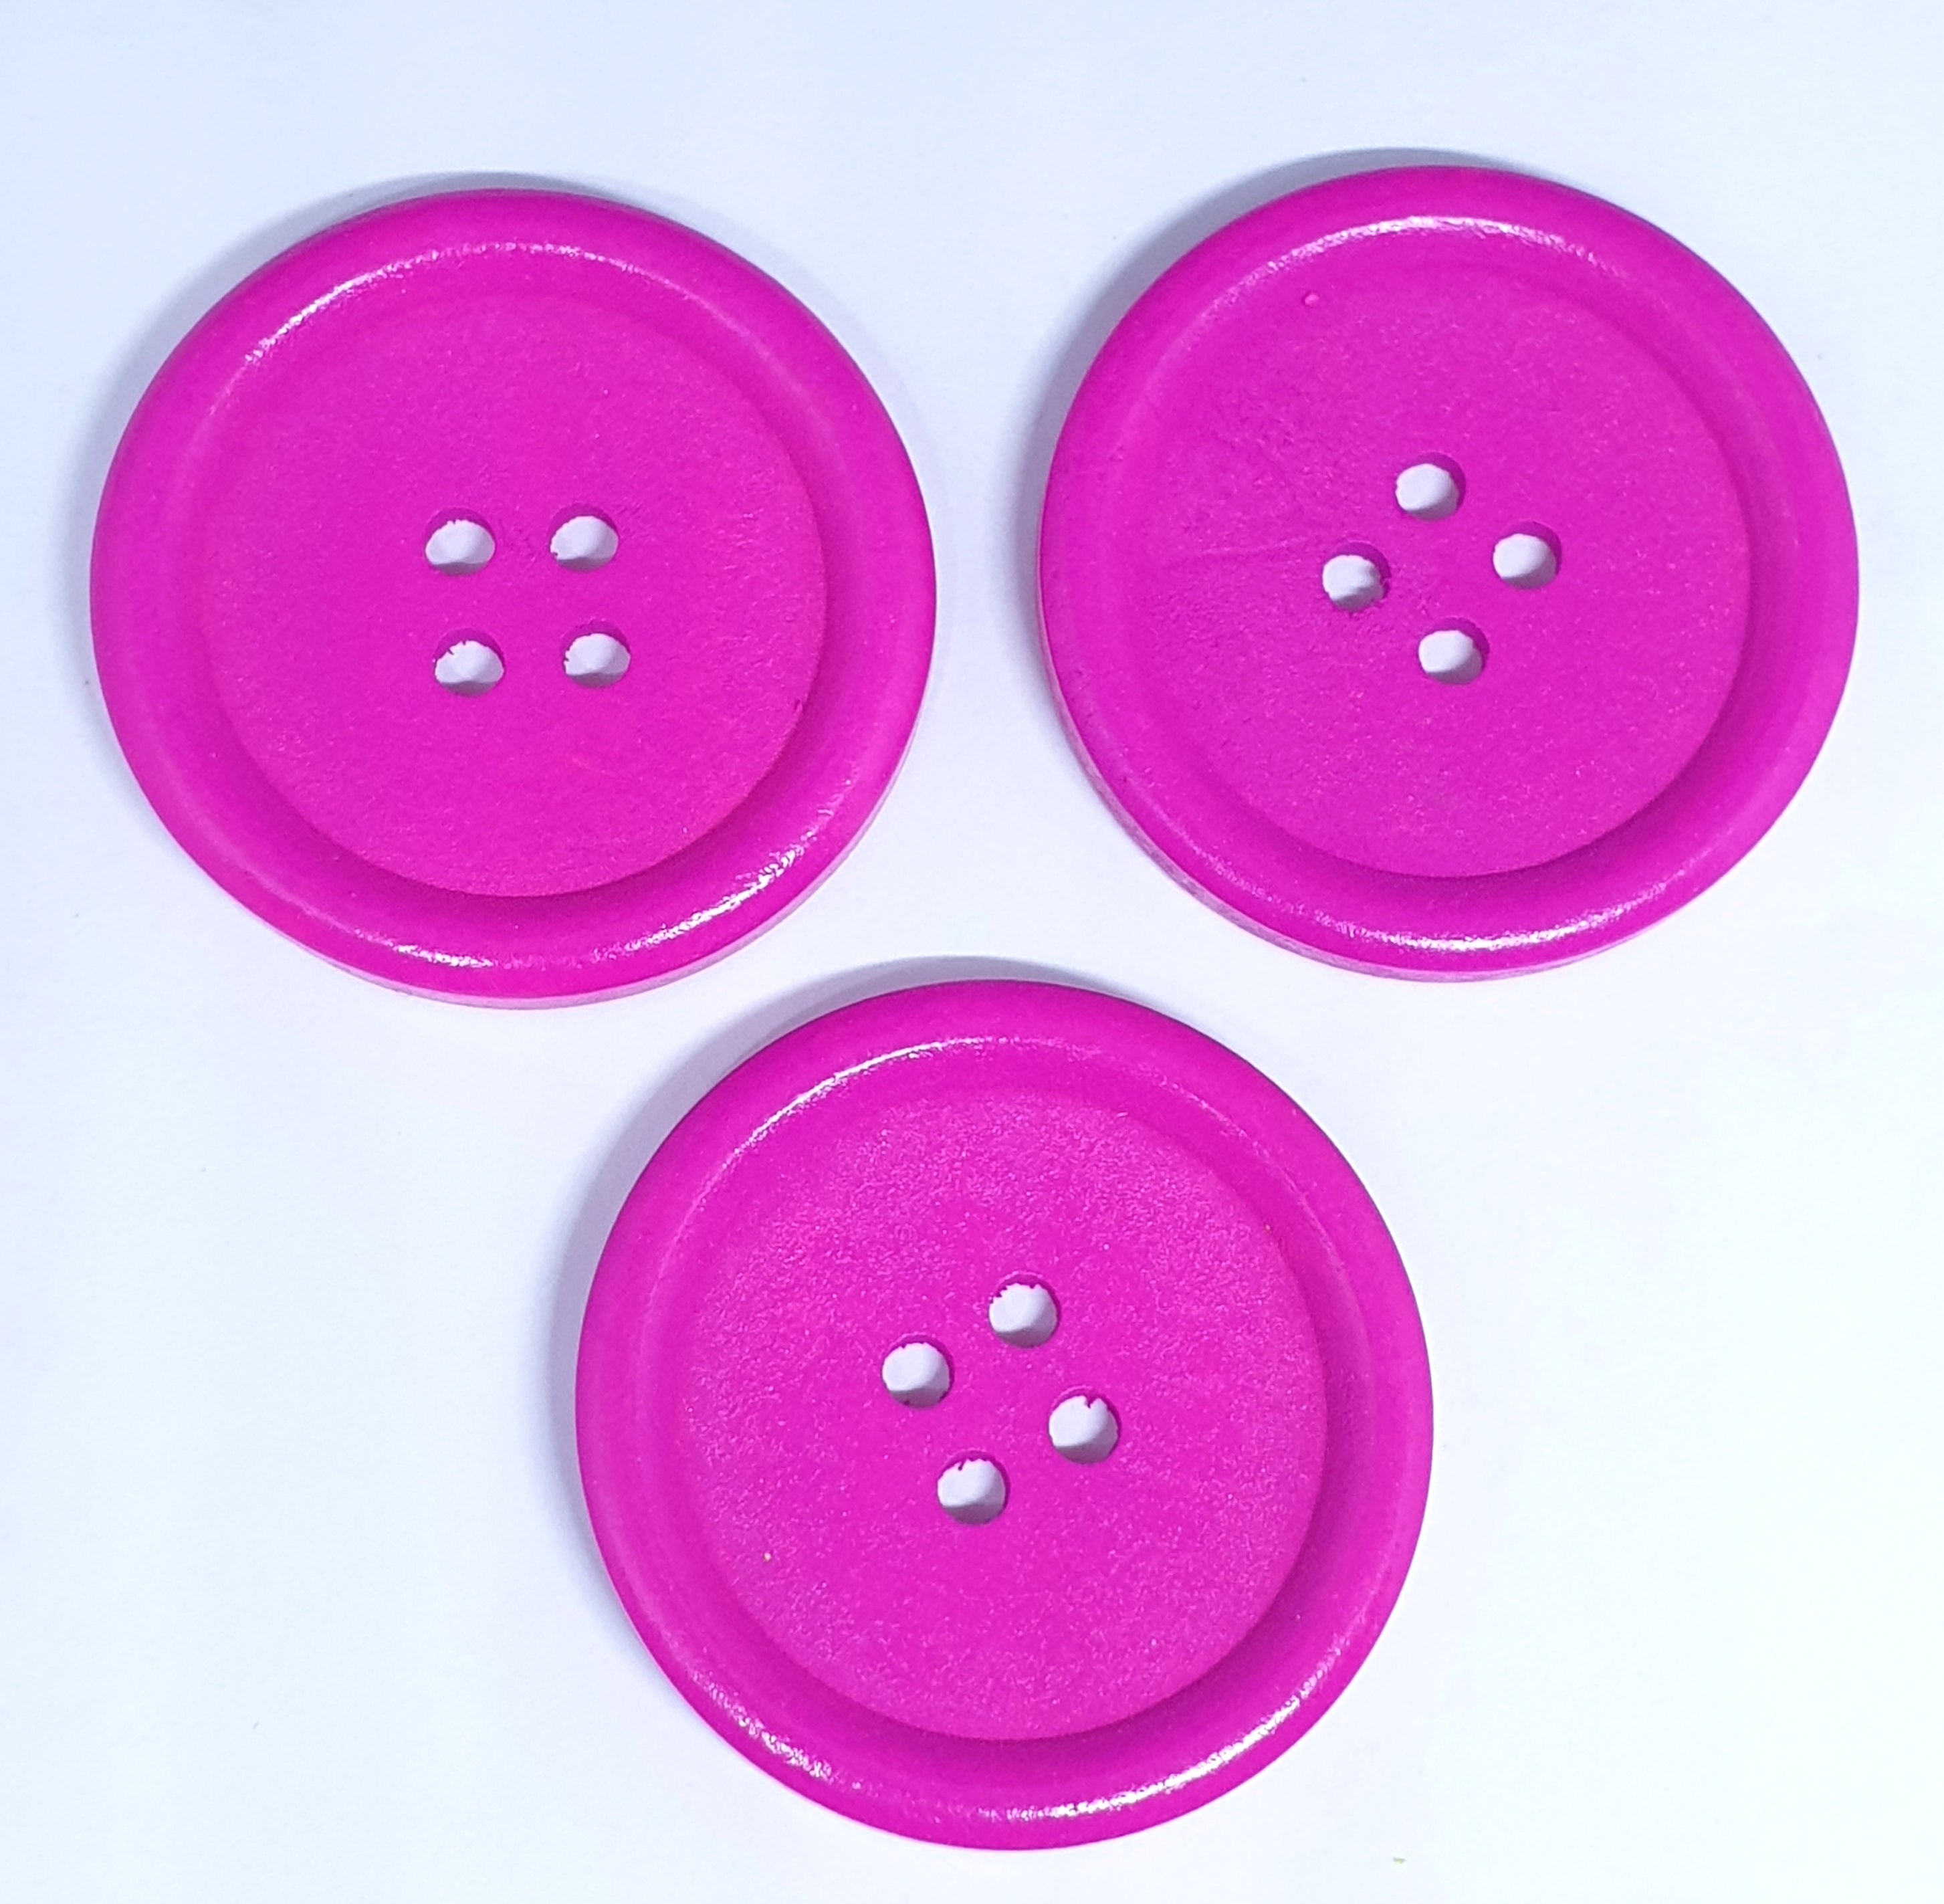 MajorCrafts 8pcs 40mm Hot Pink Round 4 Holes Large Wooden Sewing Buttons